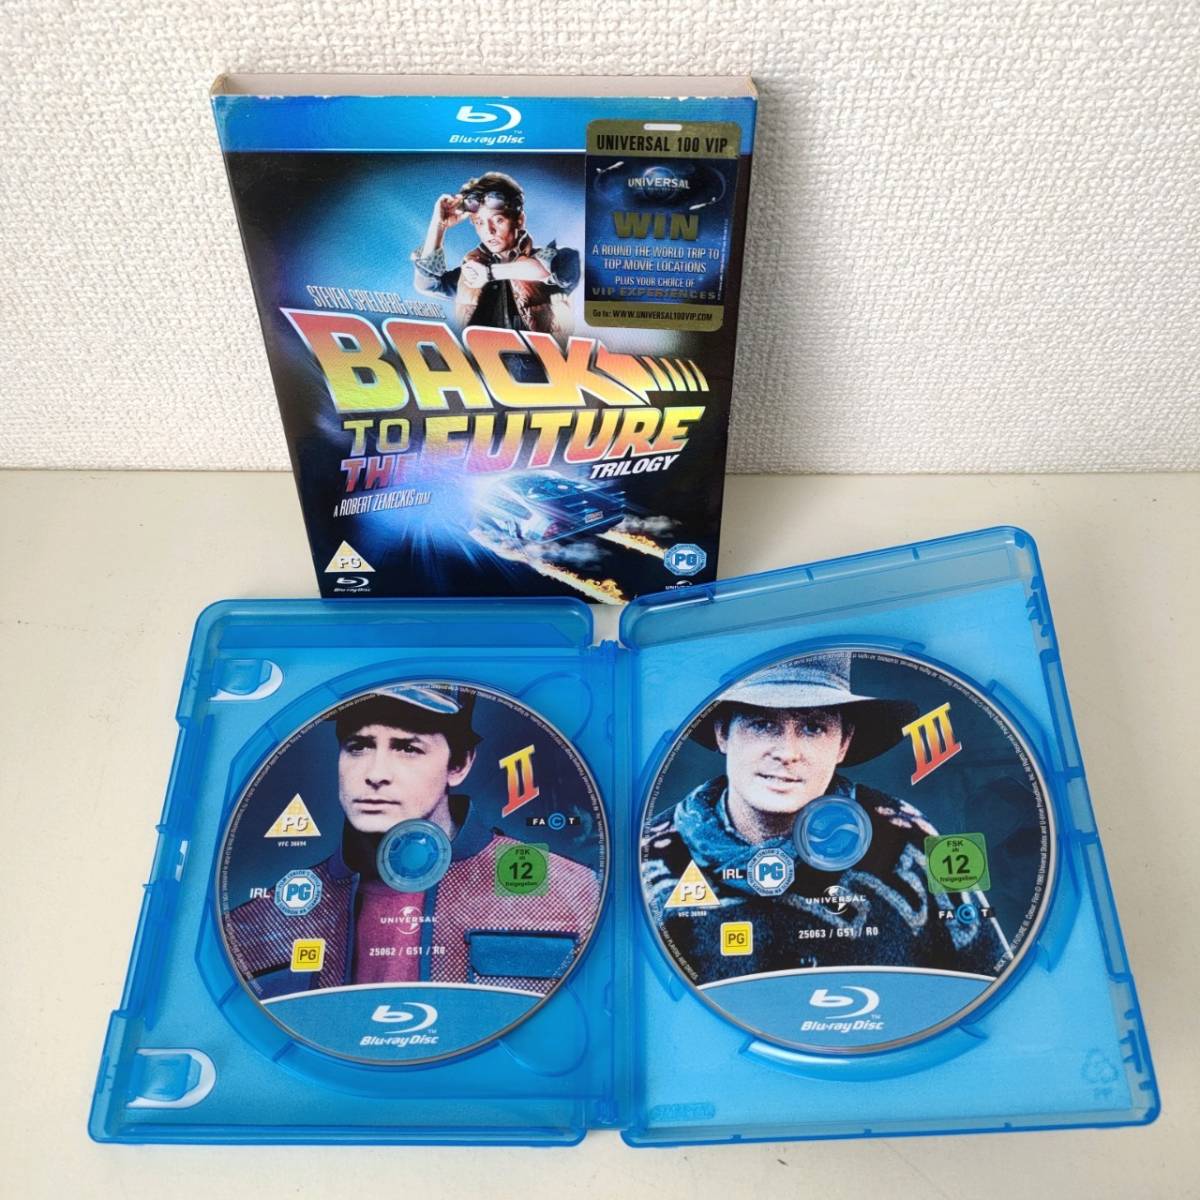 A01-4 洋画 Blu-ray BACK TO THE FUTURE TRILOGY 輸入盤 ブルーレイ バックトゥザフューチャー_画像5